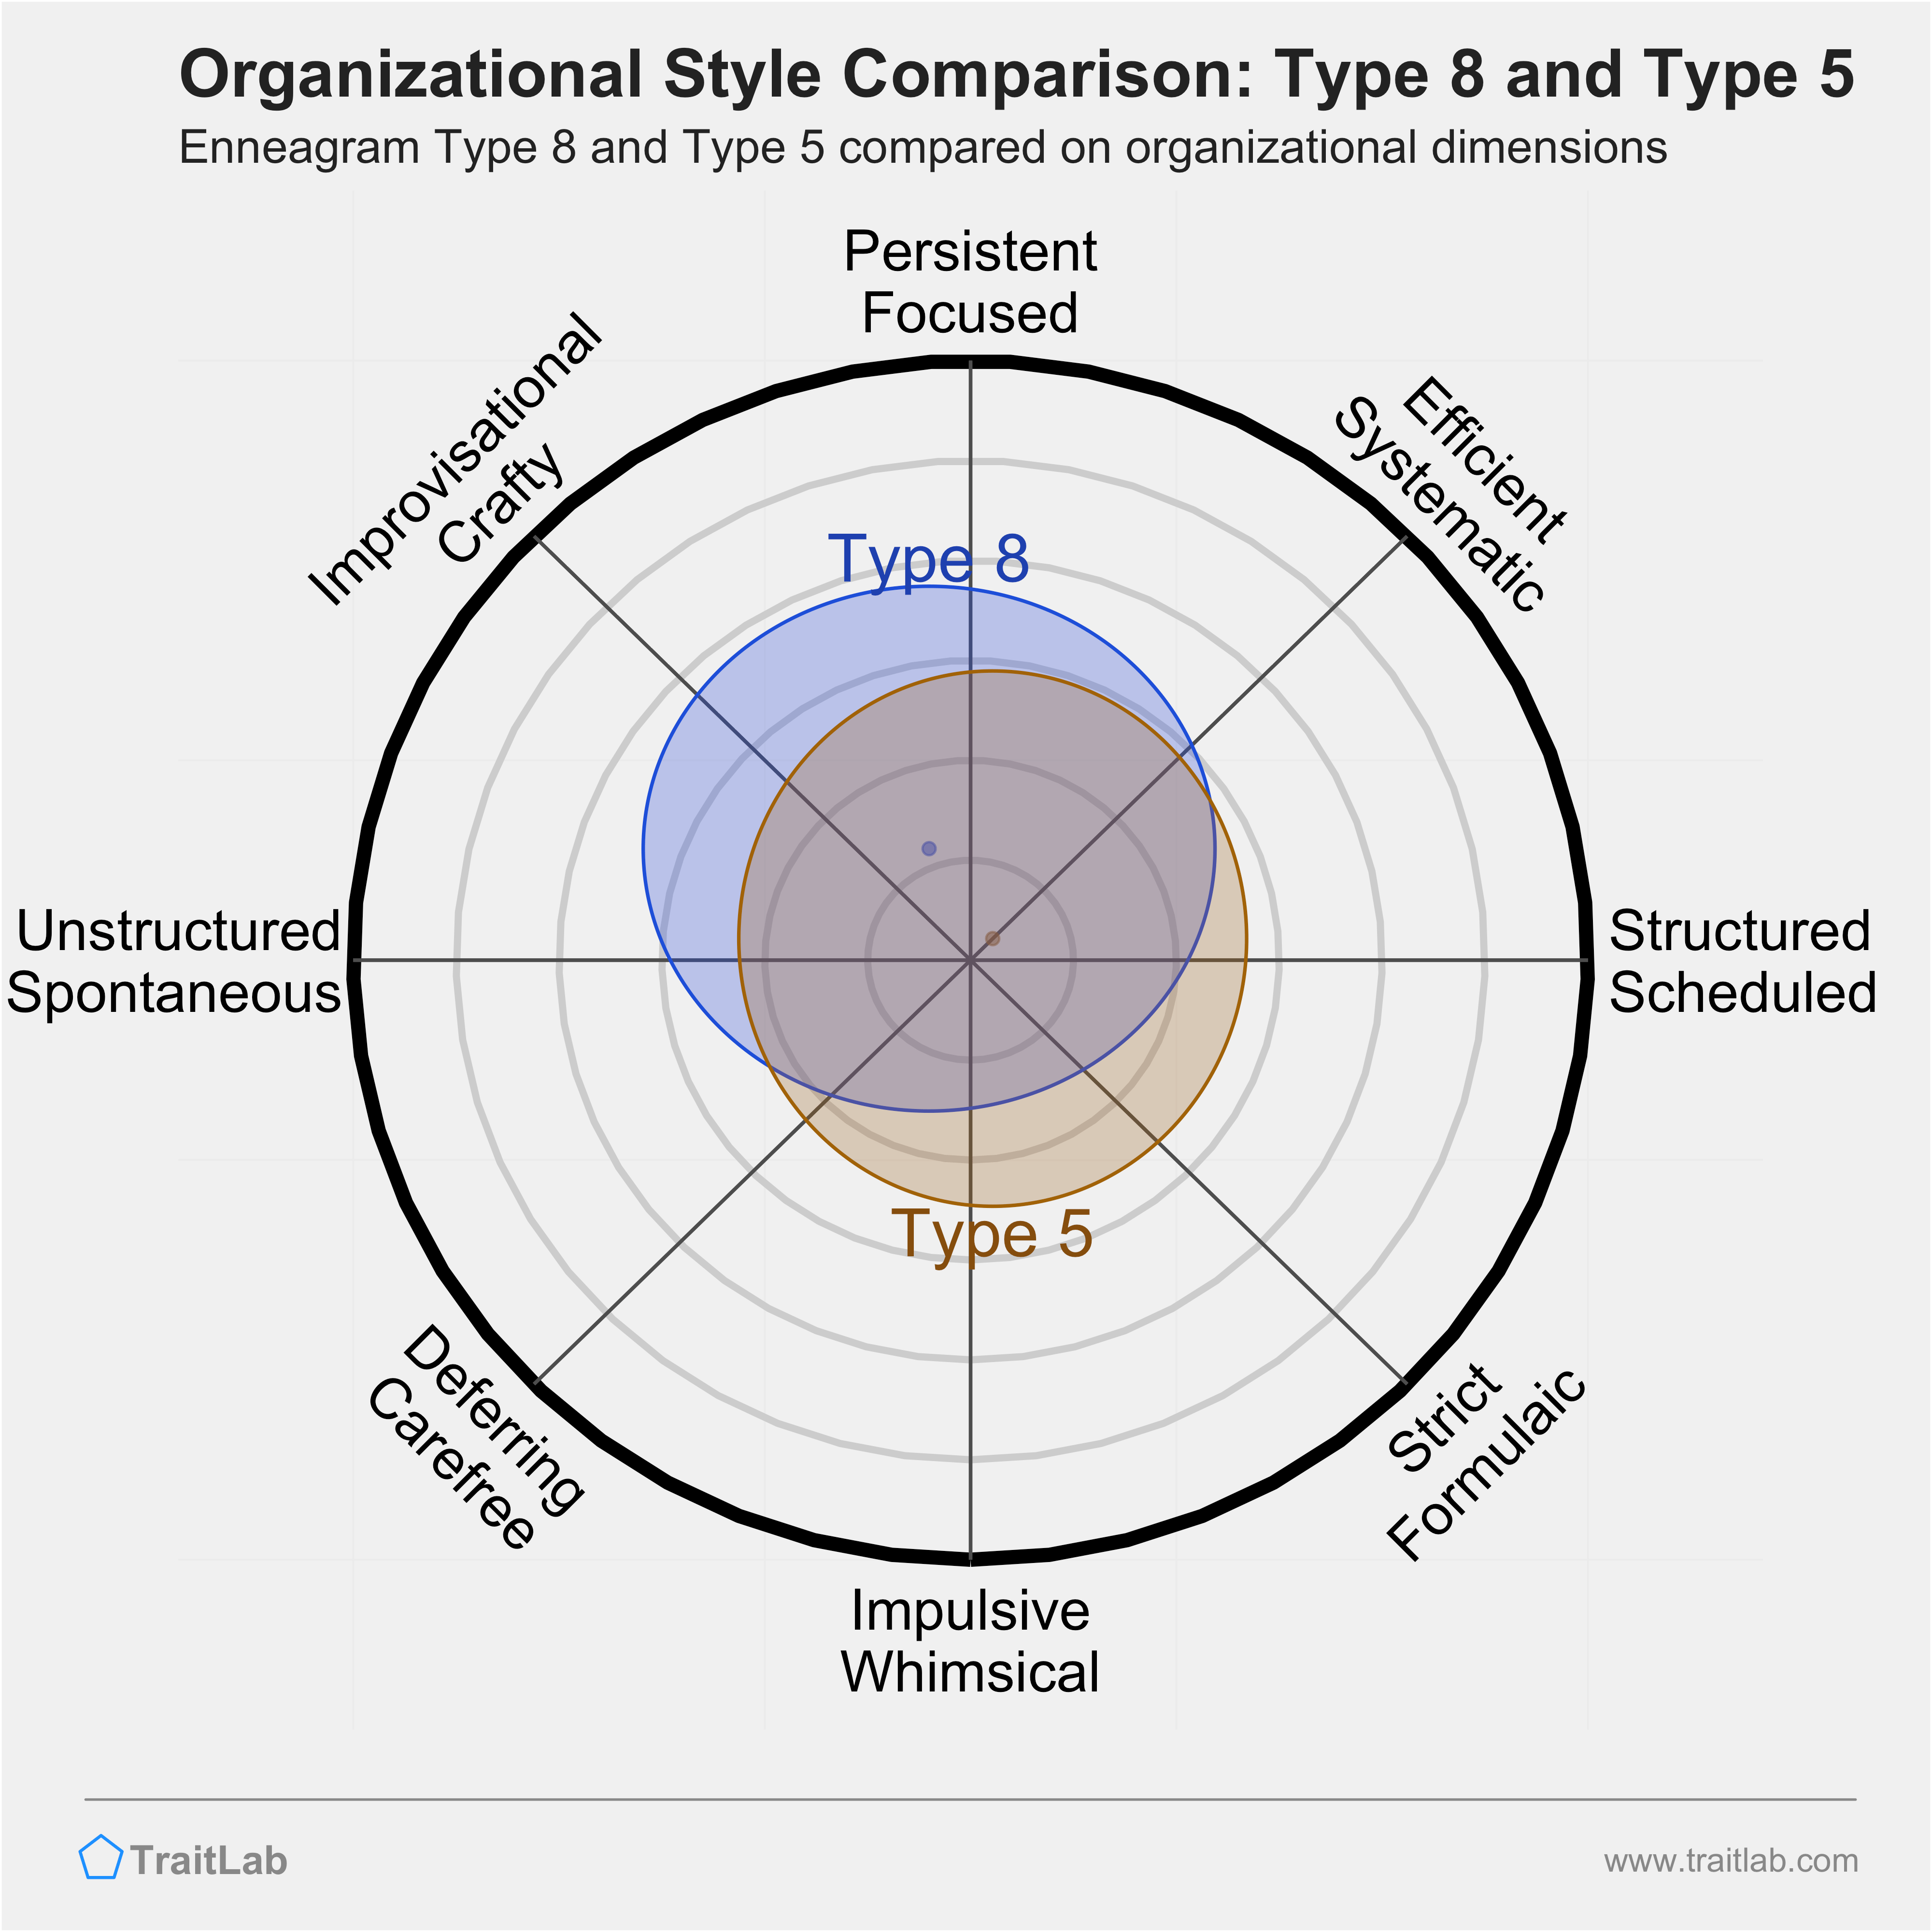 Type 8 and Type 5 comparison across organizational dimensions